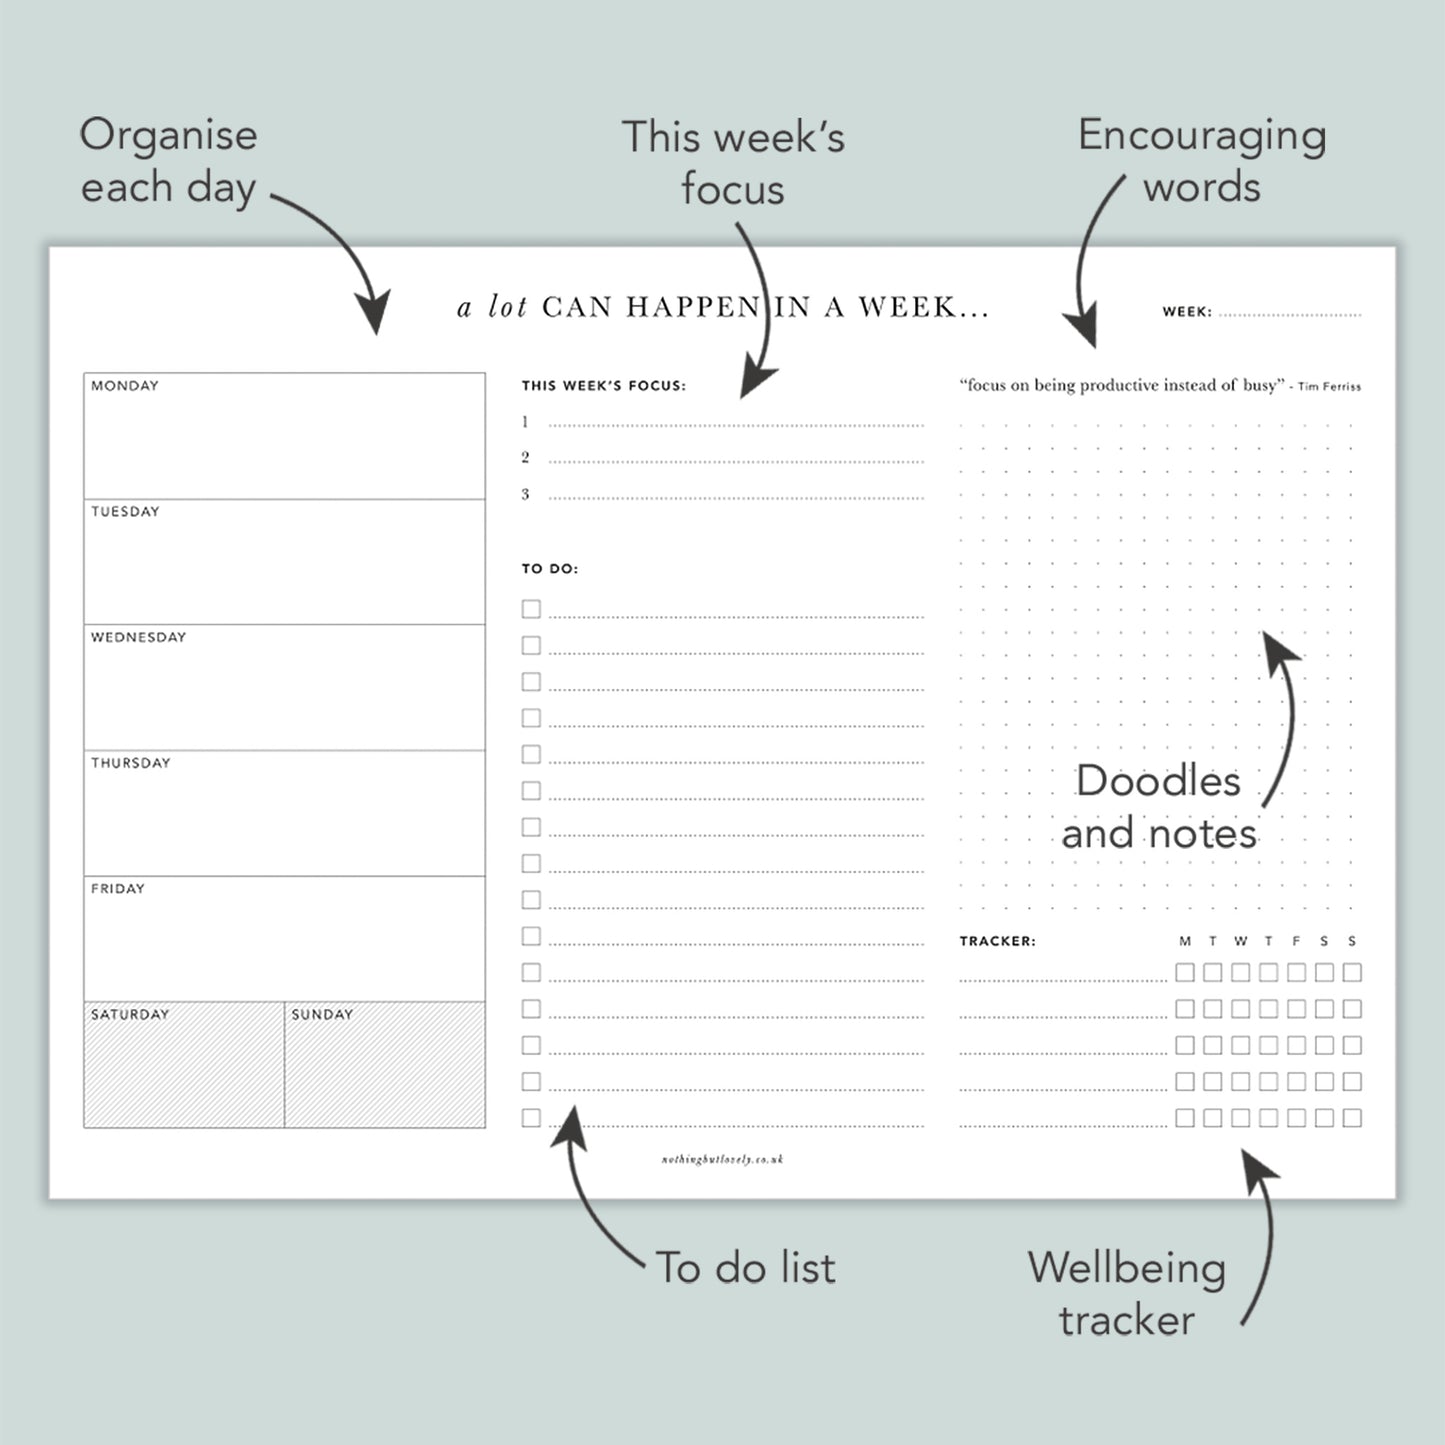 weekly planner pad with arrows detailing organise each day, this weeks focus, encouraging words, doodles and notes, to do list, wellbeing tracker